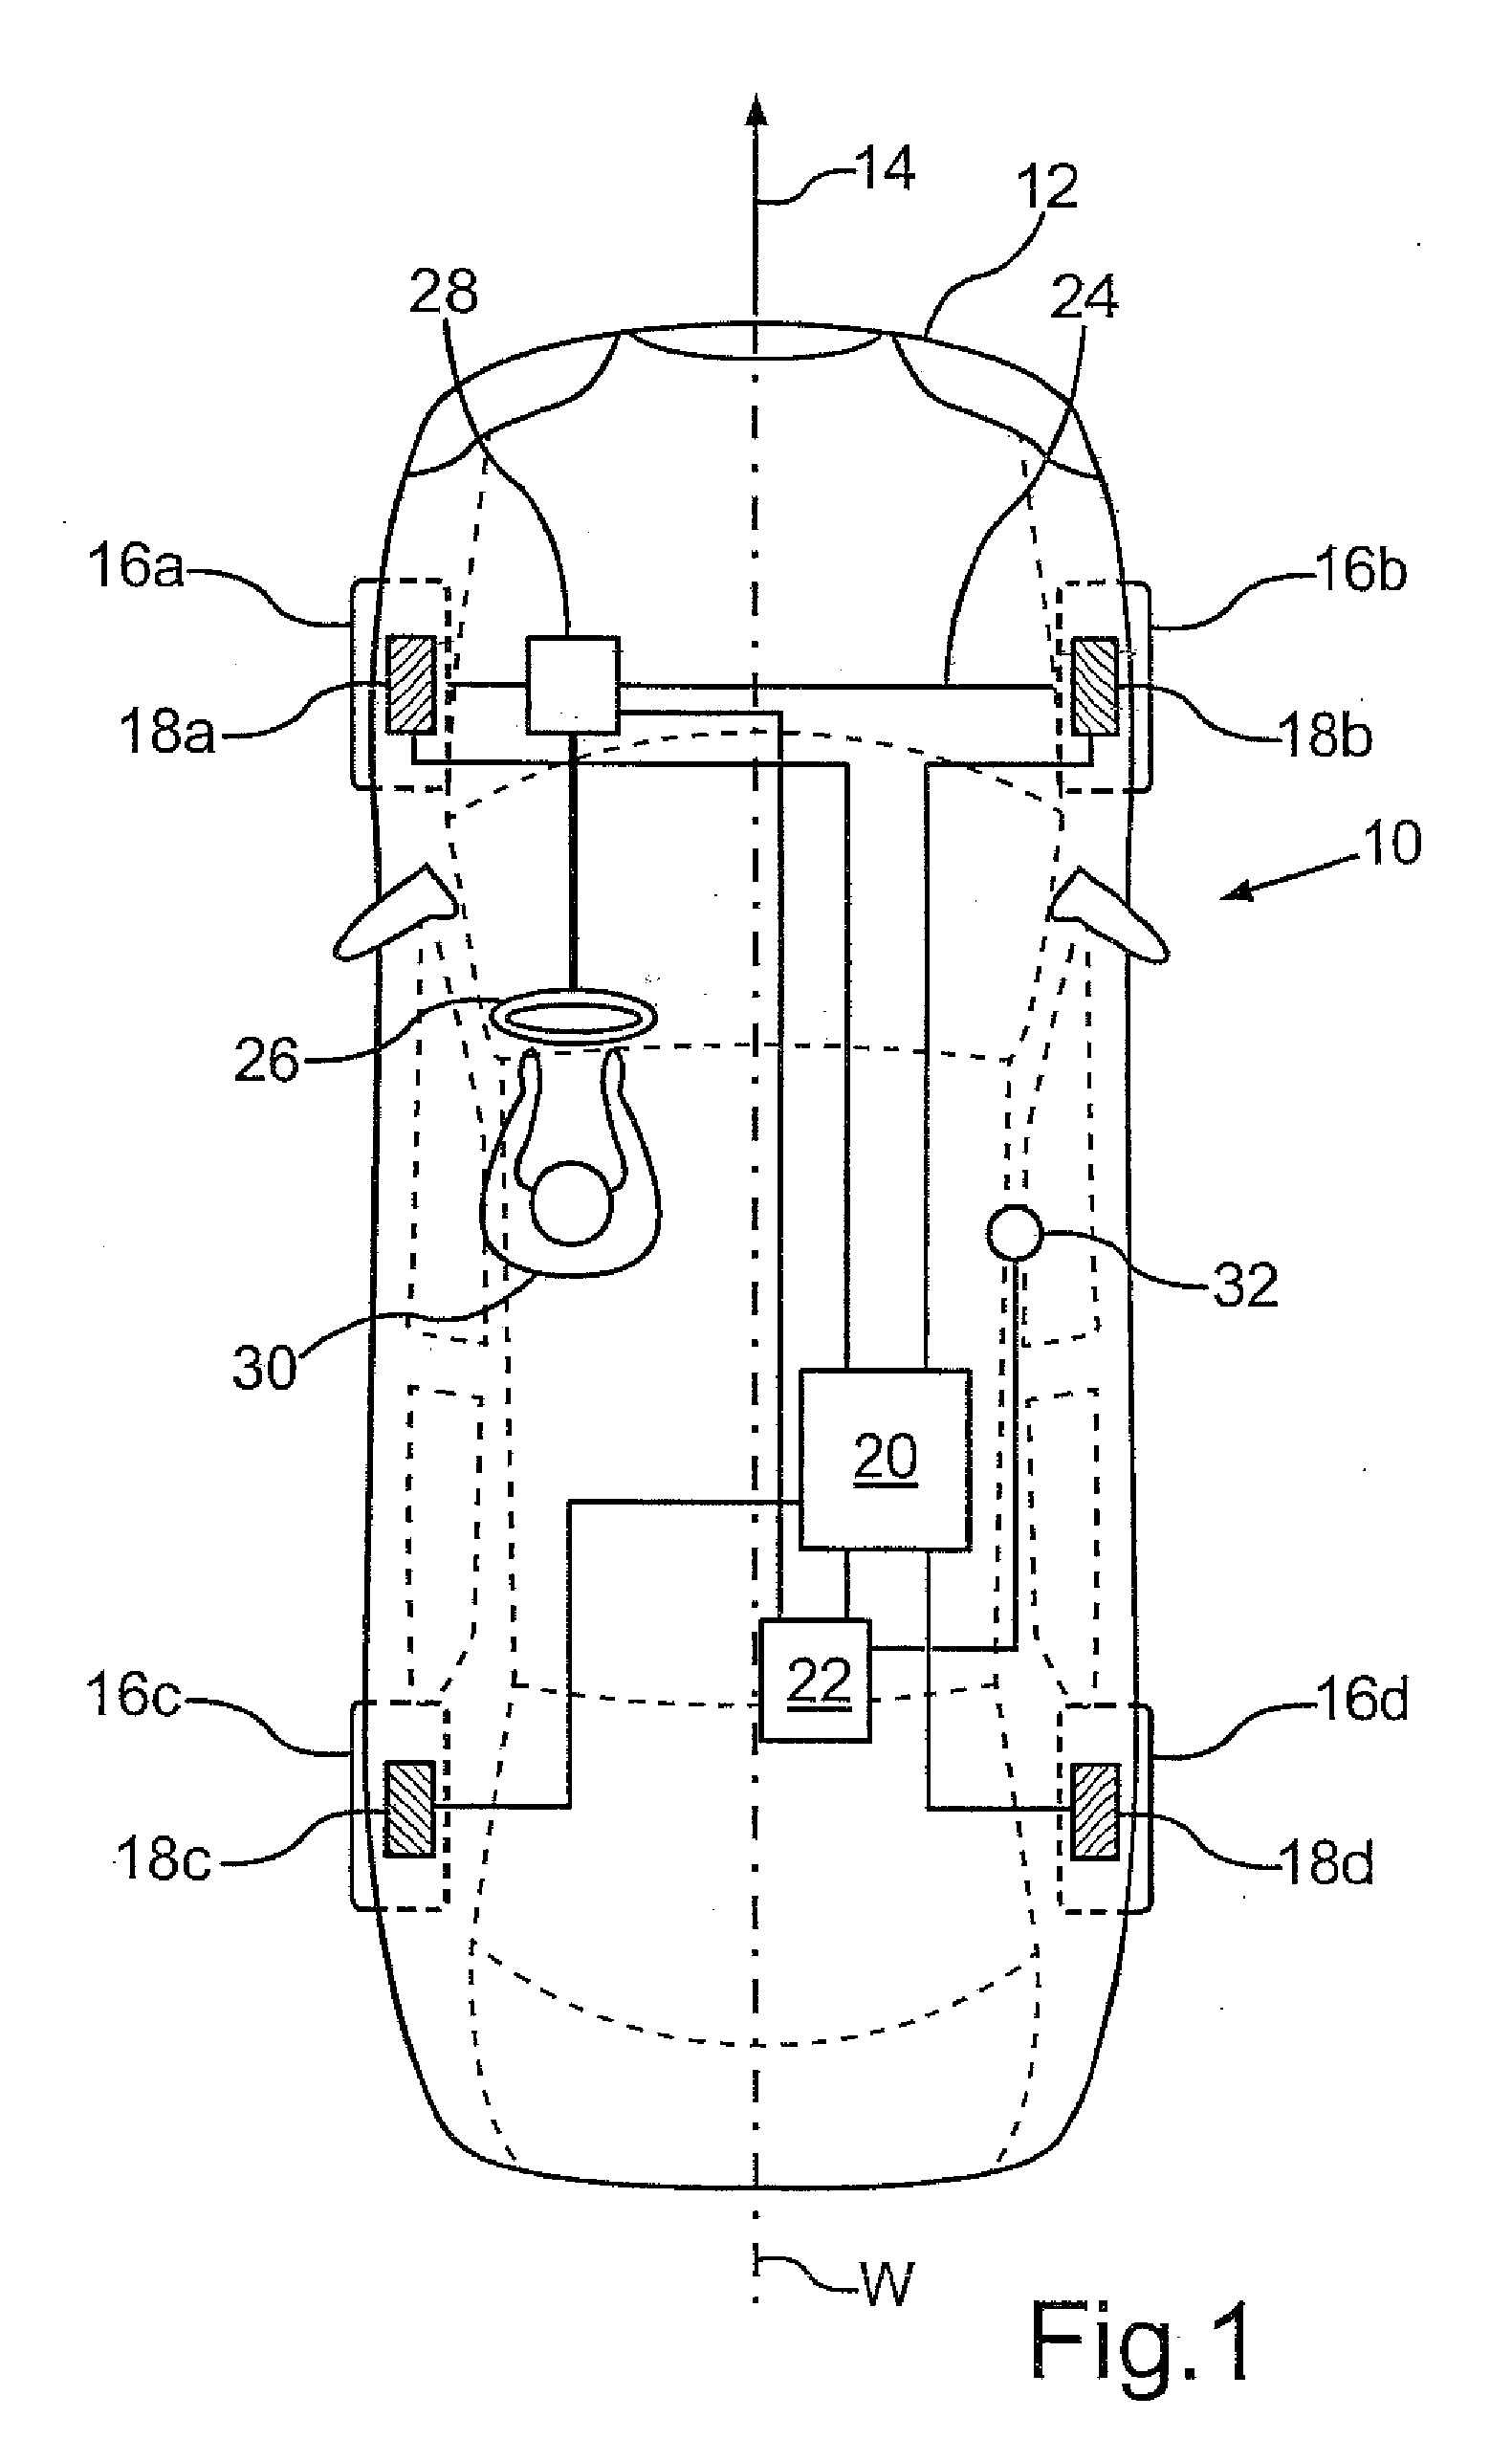 Method and apparatus for affecting cornering performance of a motor vehicle, and a motor vehicle